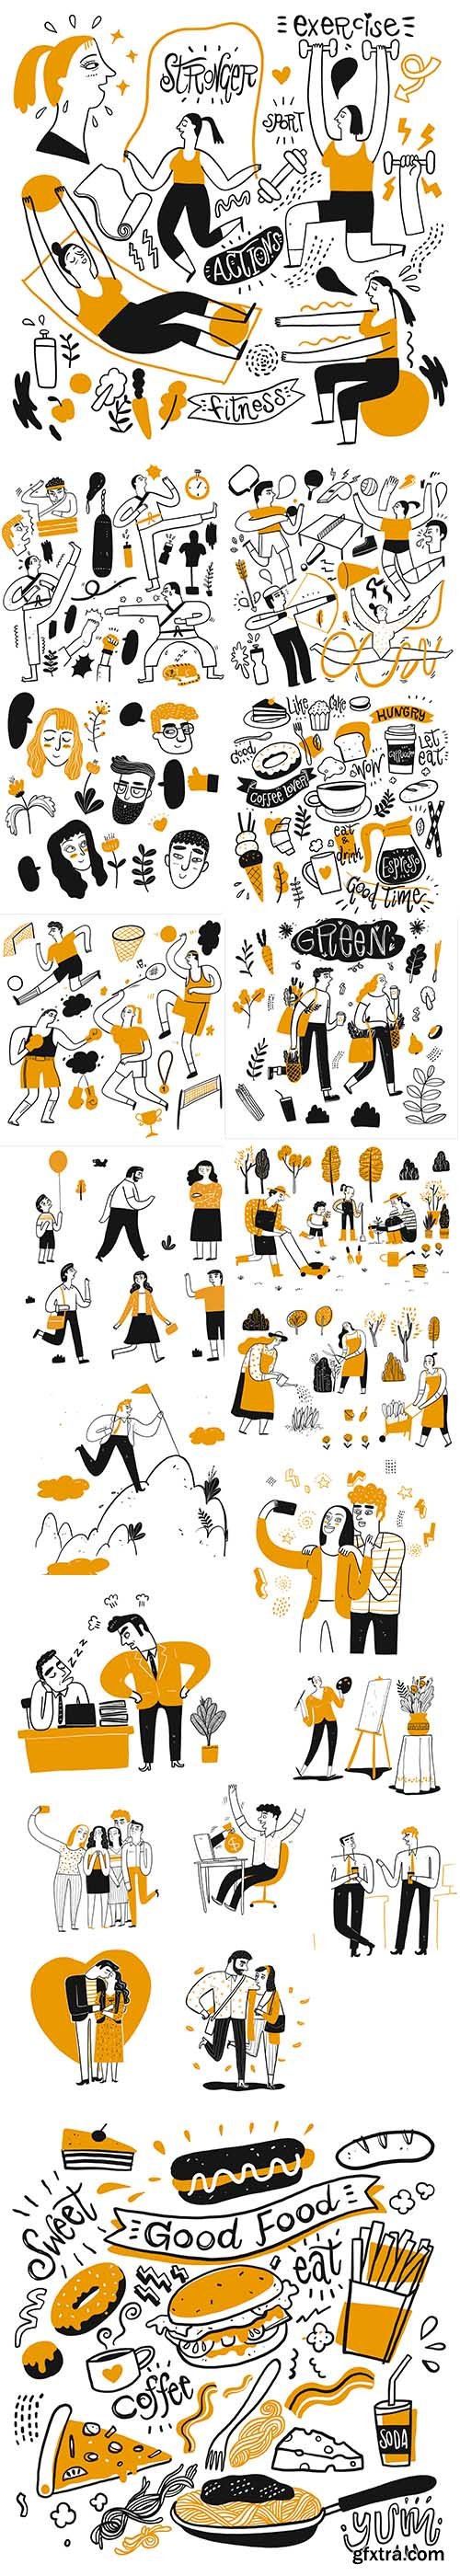 Activities People Concept Illustration